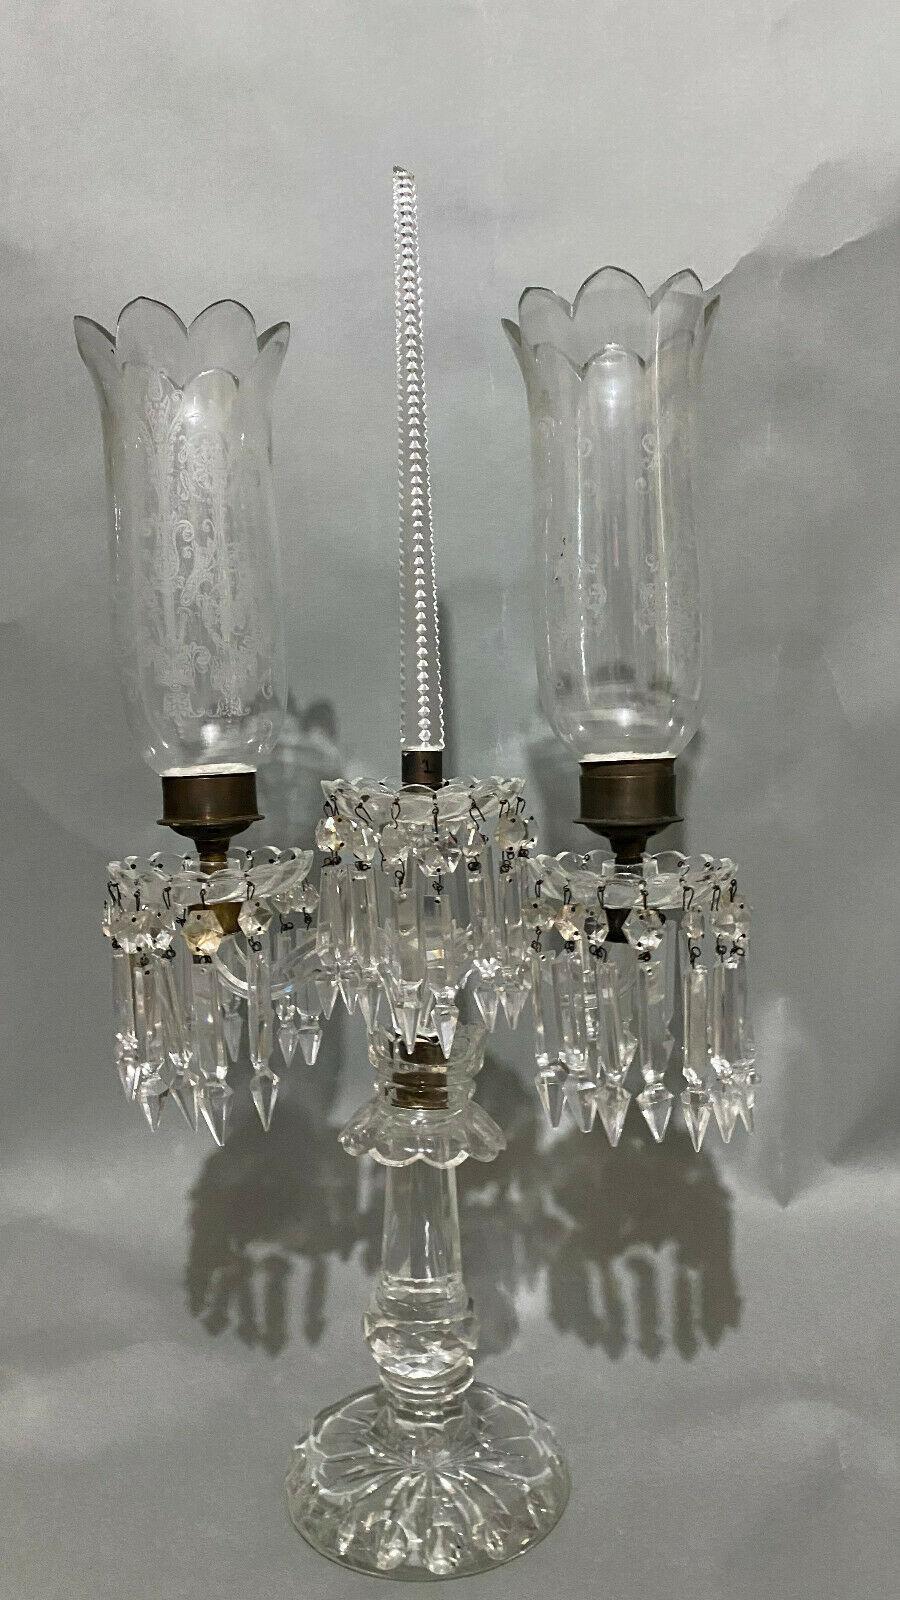 19thc French Napoleon III Cut Crystal Candelabra attributed to Baccarat  For Sale 8